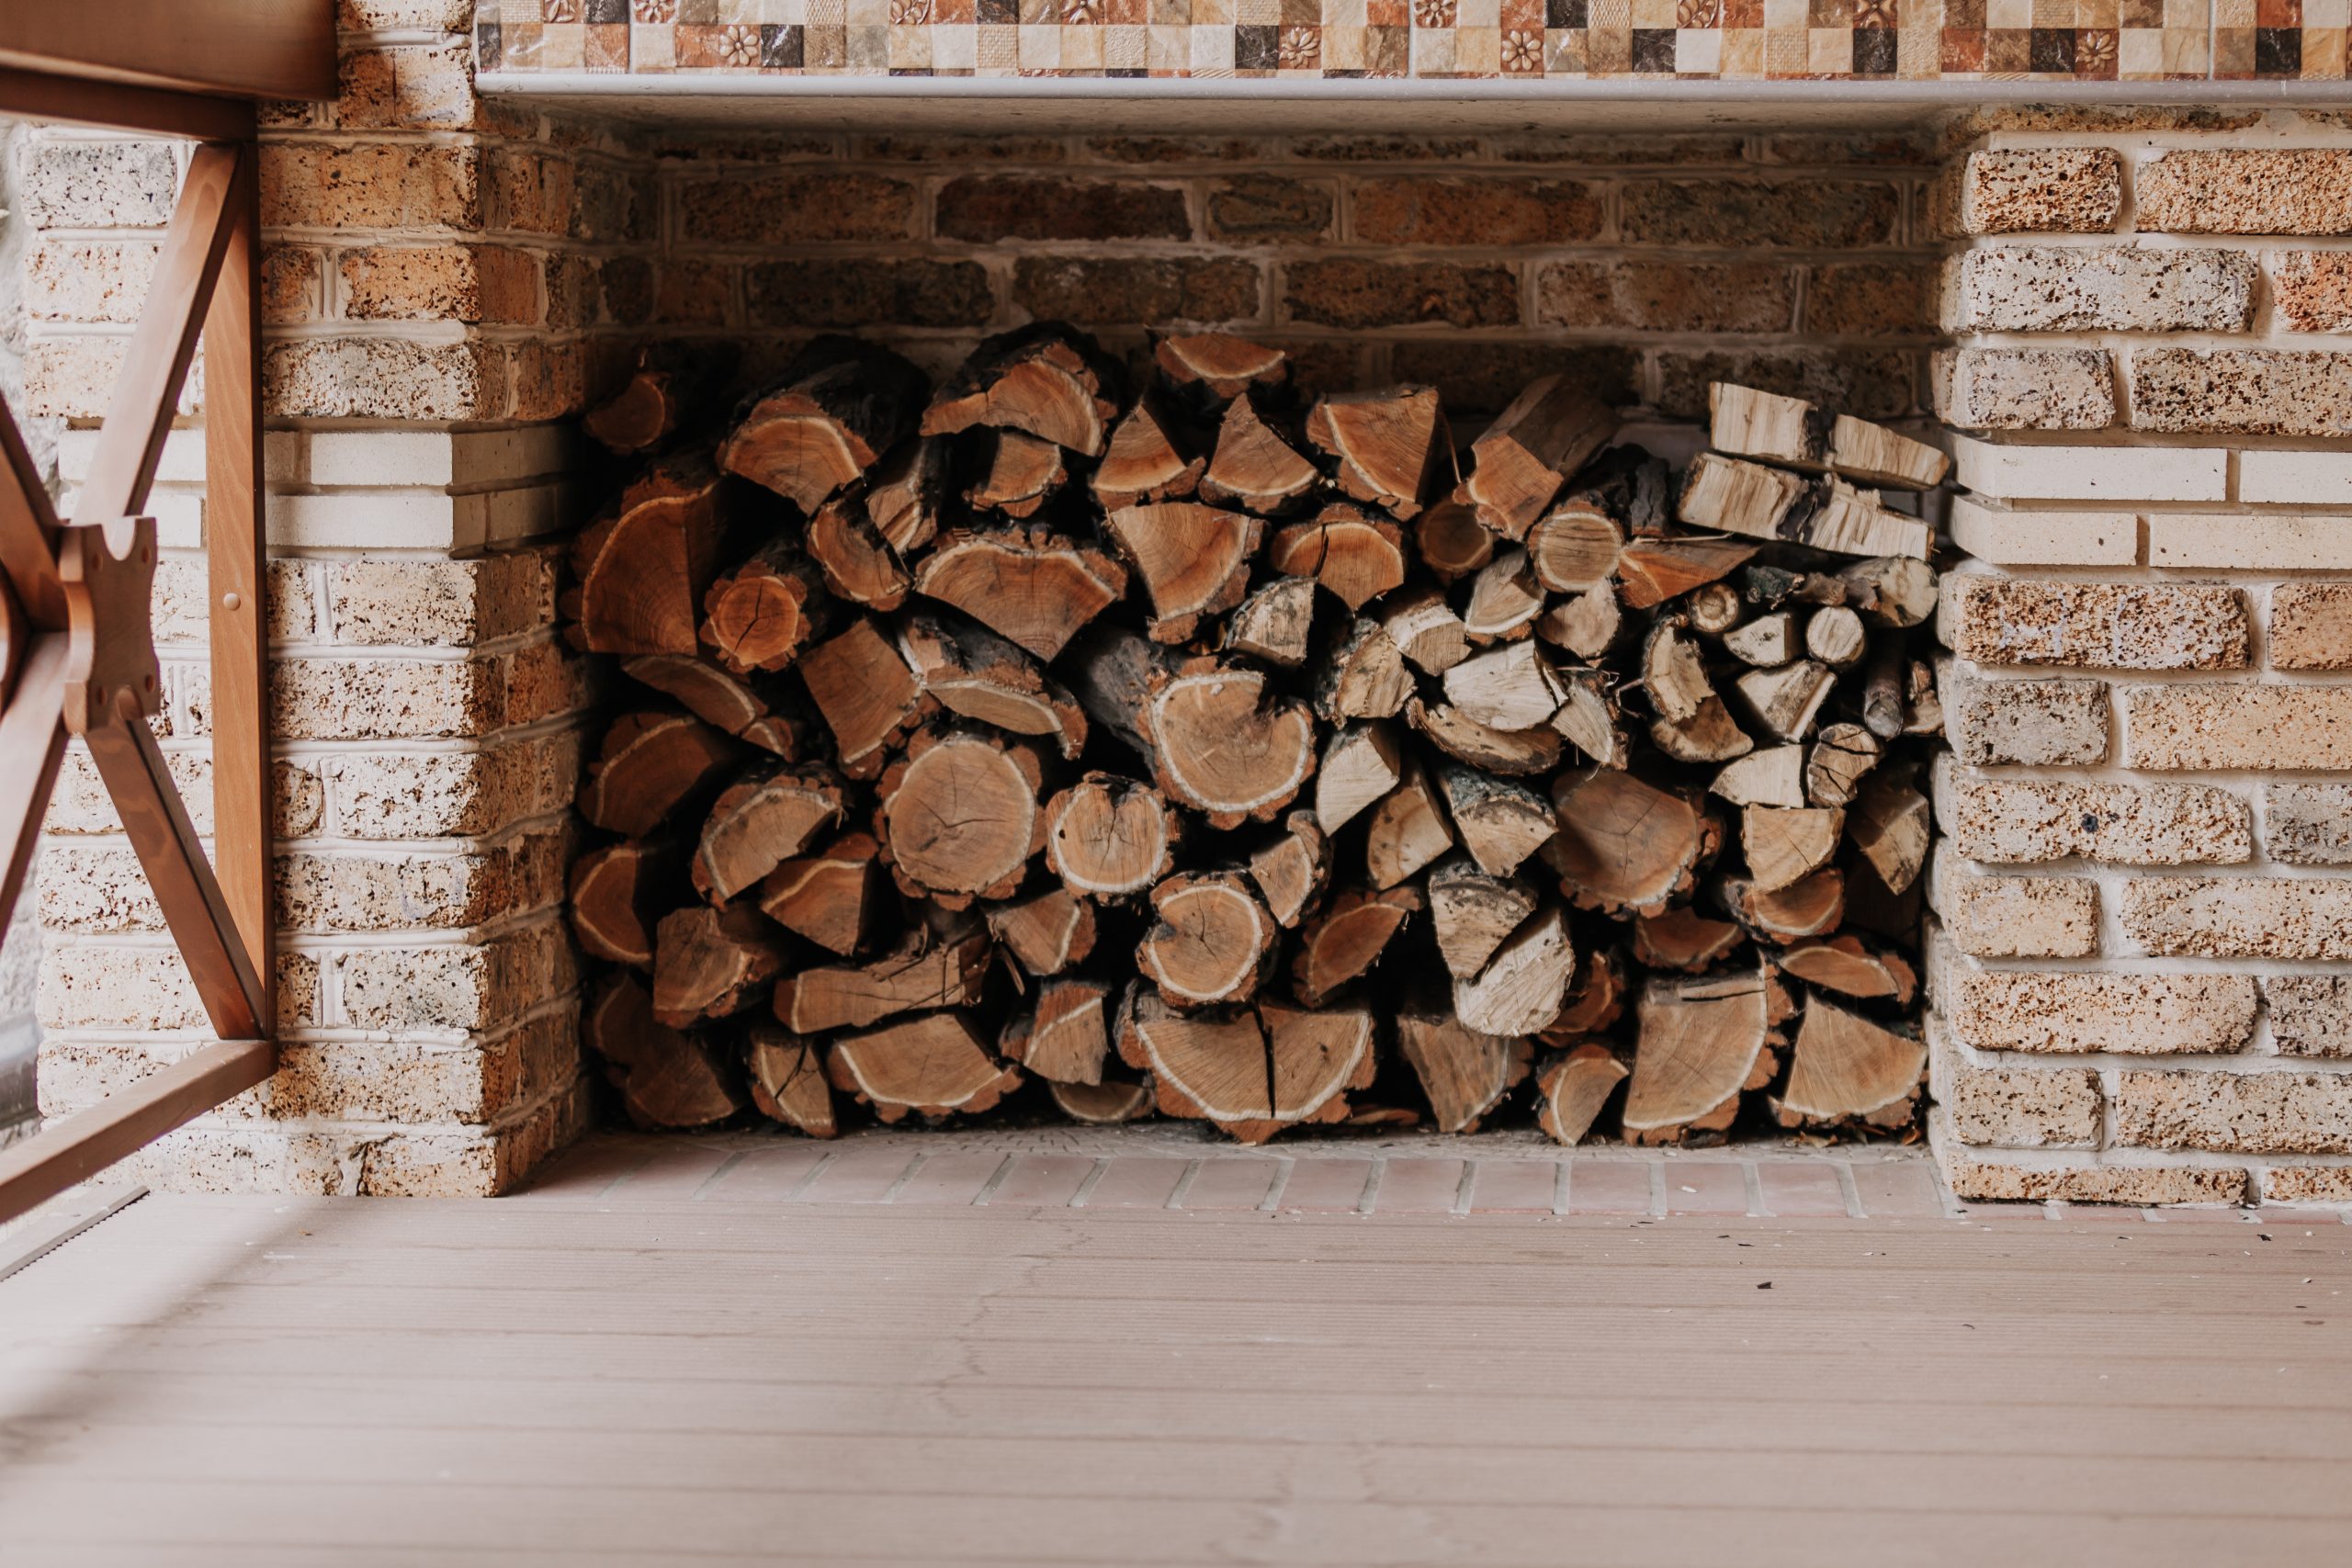 Firewood stacked in niche on veranda for winter home décor ideas